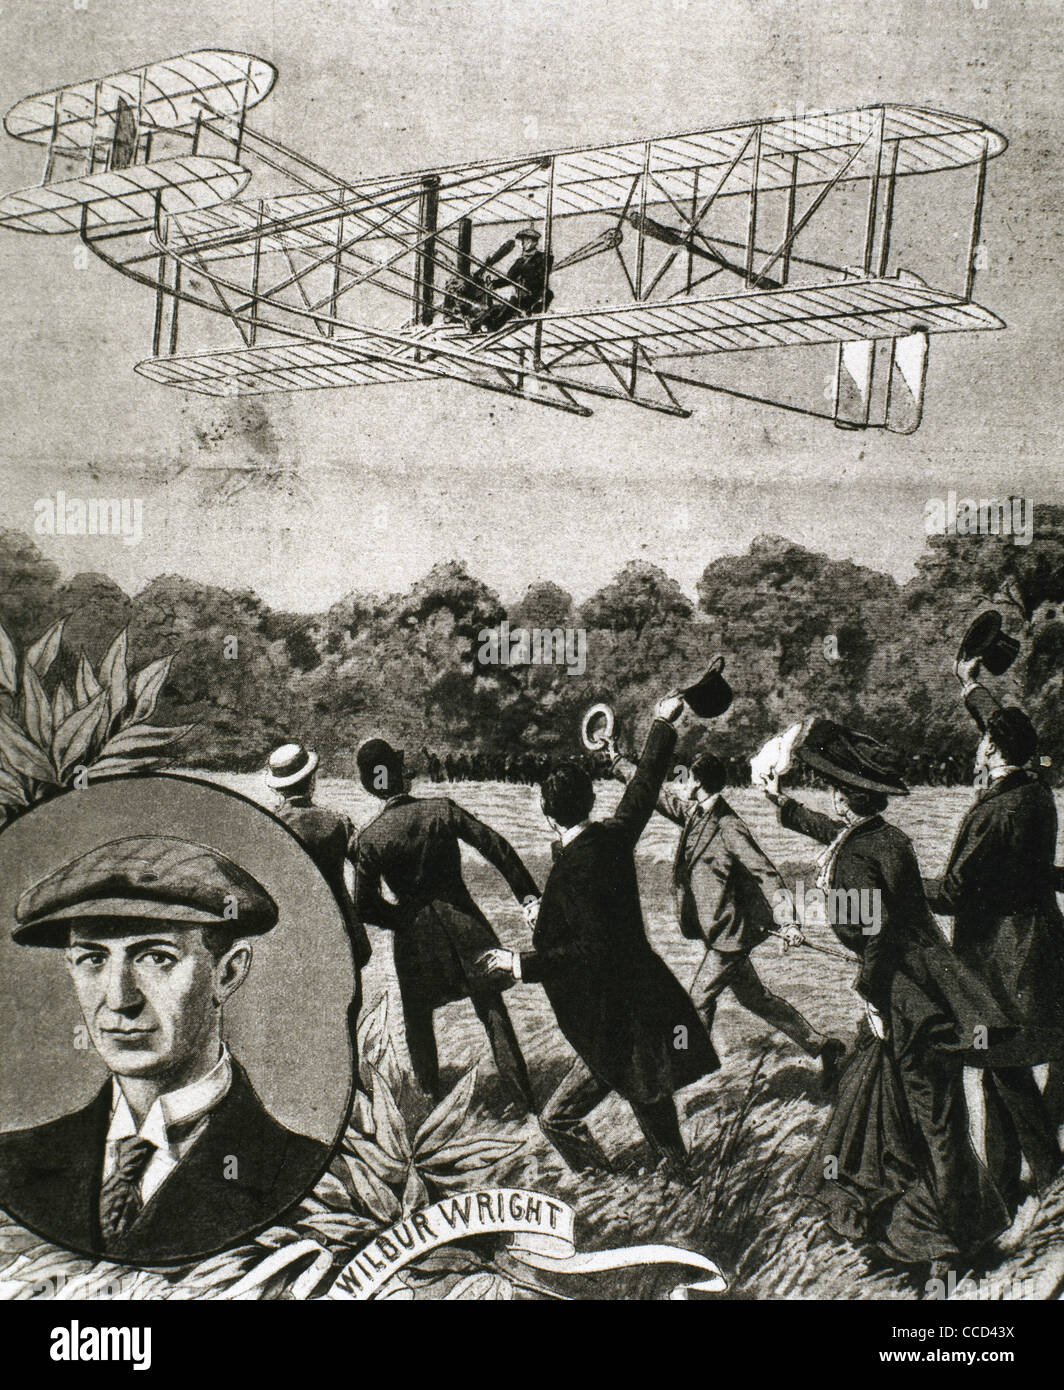 Wilbur Wright (1867-1912). American aviator. Plane flying over the field Anvours (France). Illustration. Stock Photo